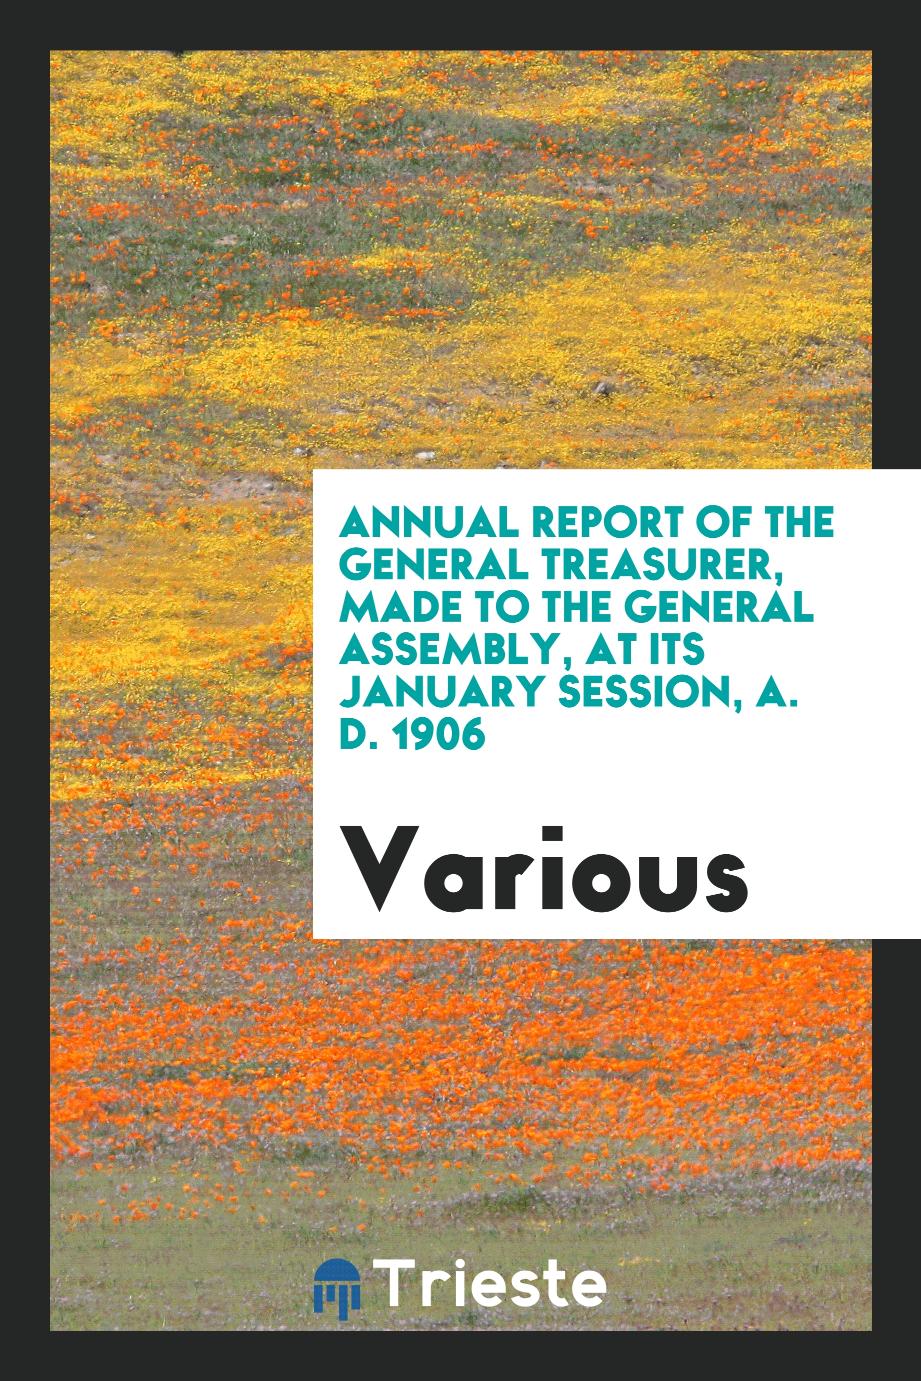 Annual Report of the General Treasurer, Made to the General Assembly, at Its January Session, A. D. 1906